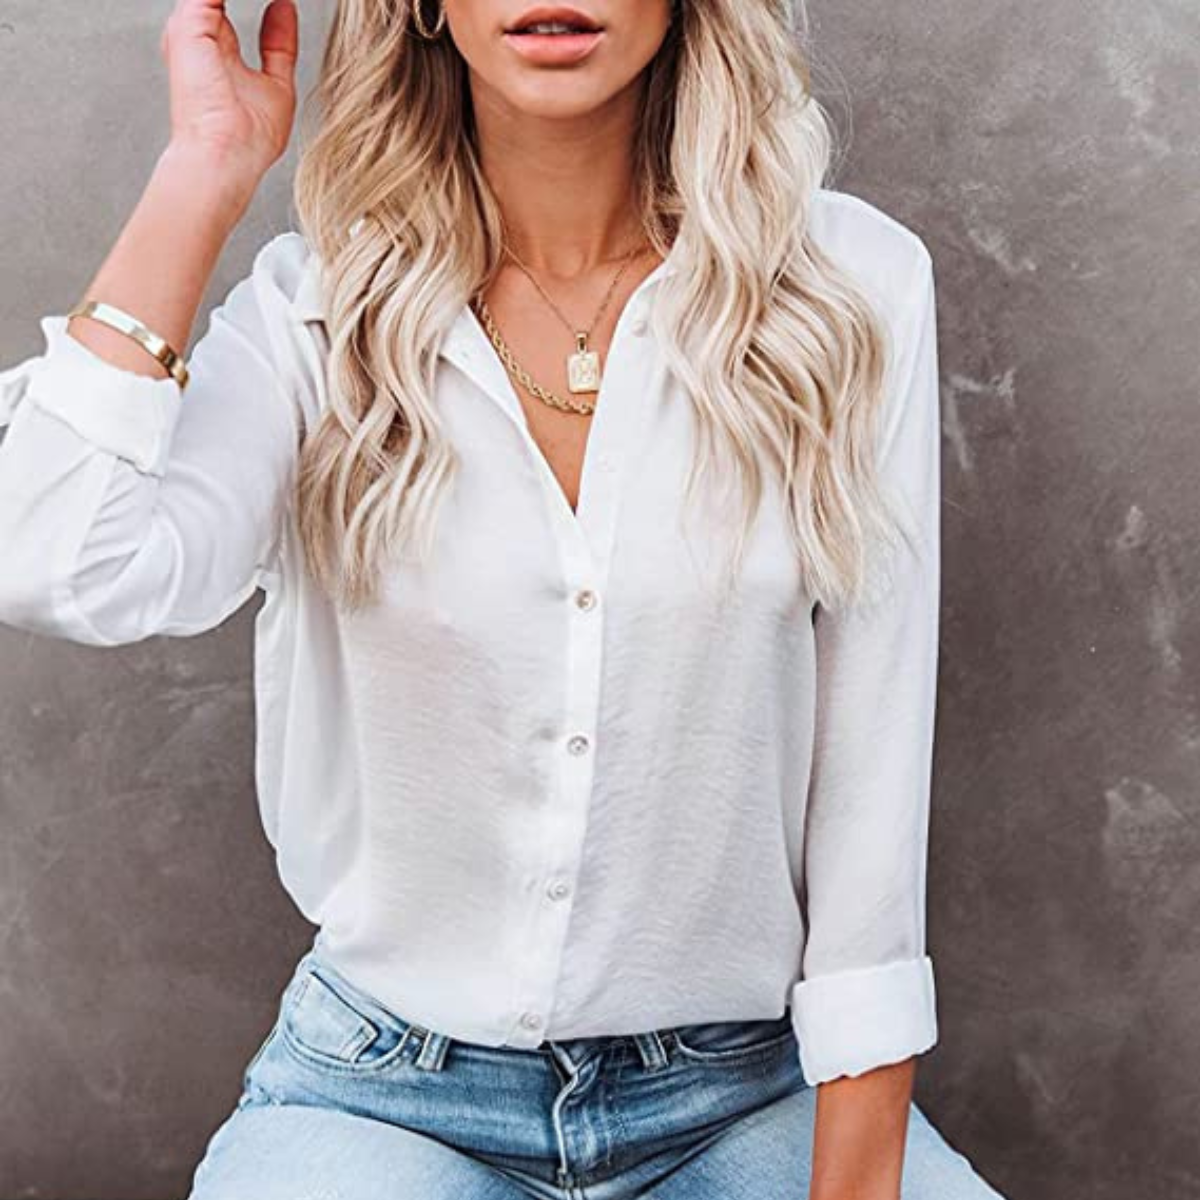 Chic Is In And These 37 Items Make Me Want To Revamp My Entire Wardrobe